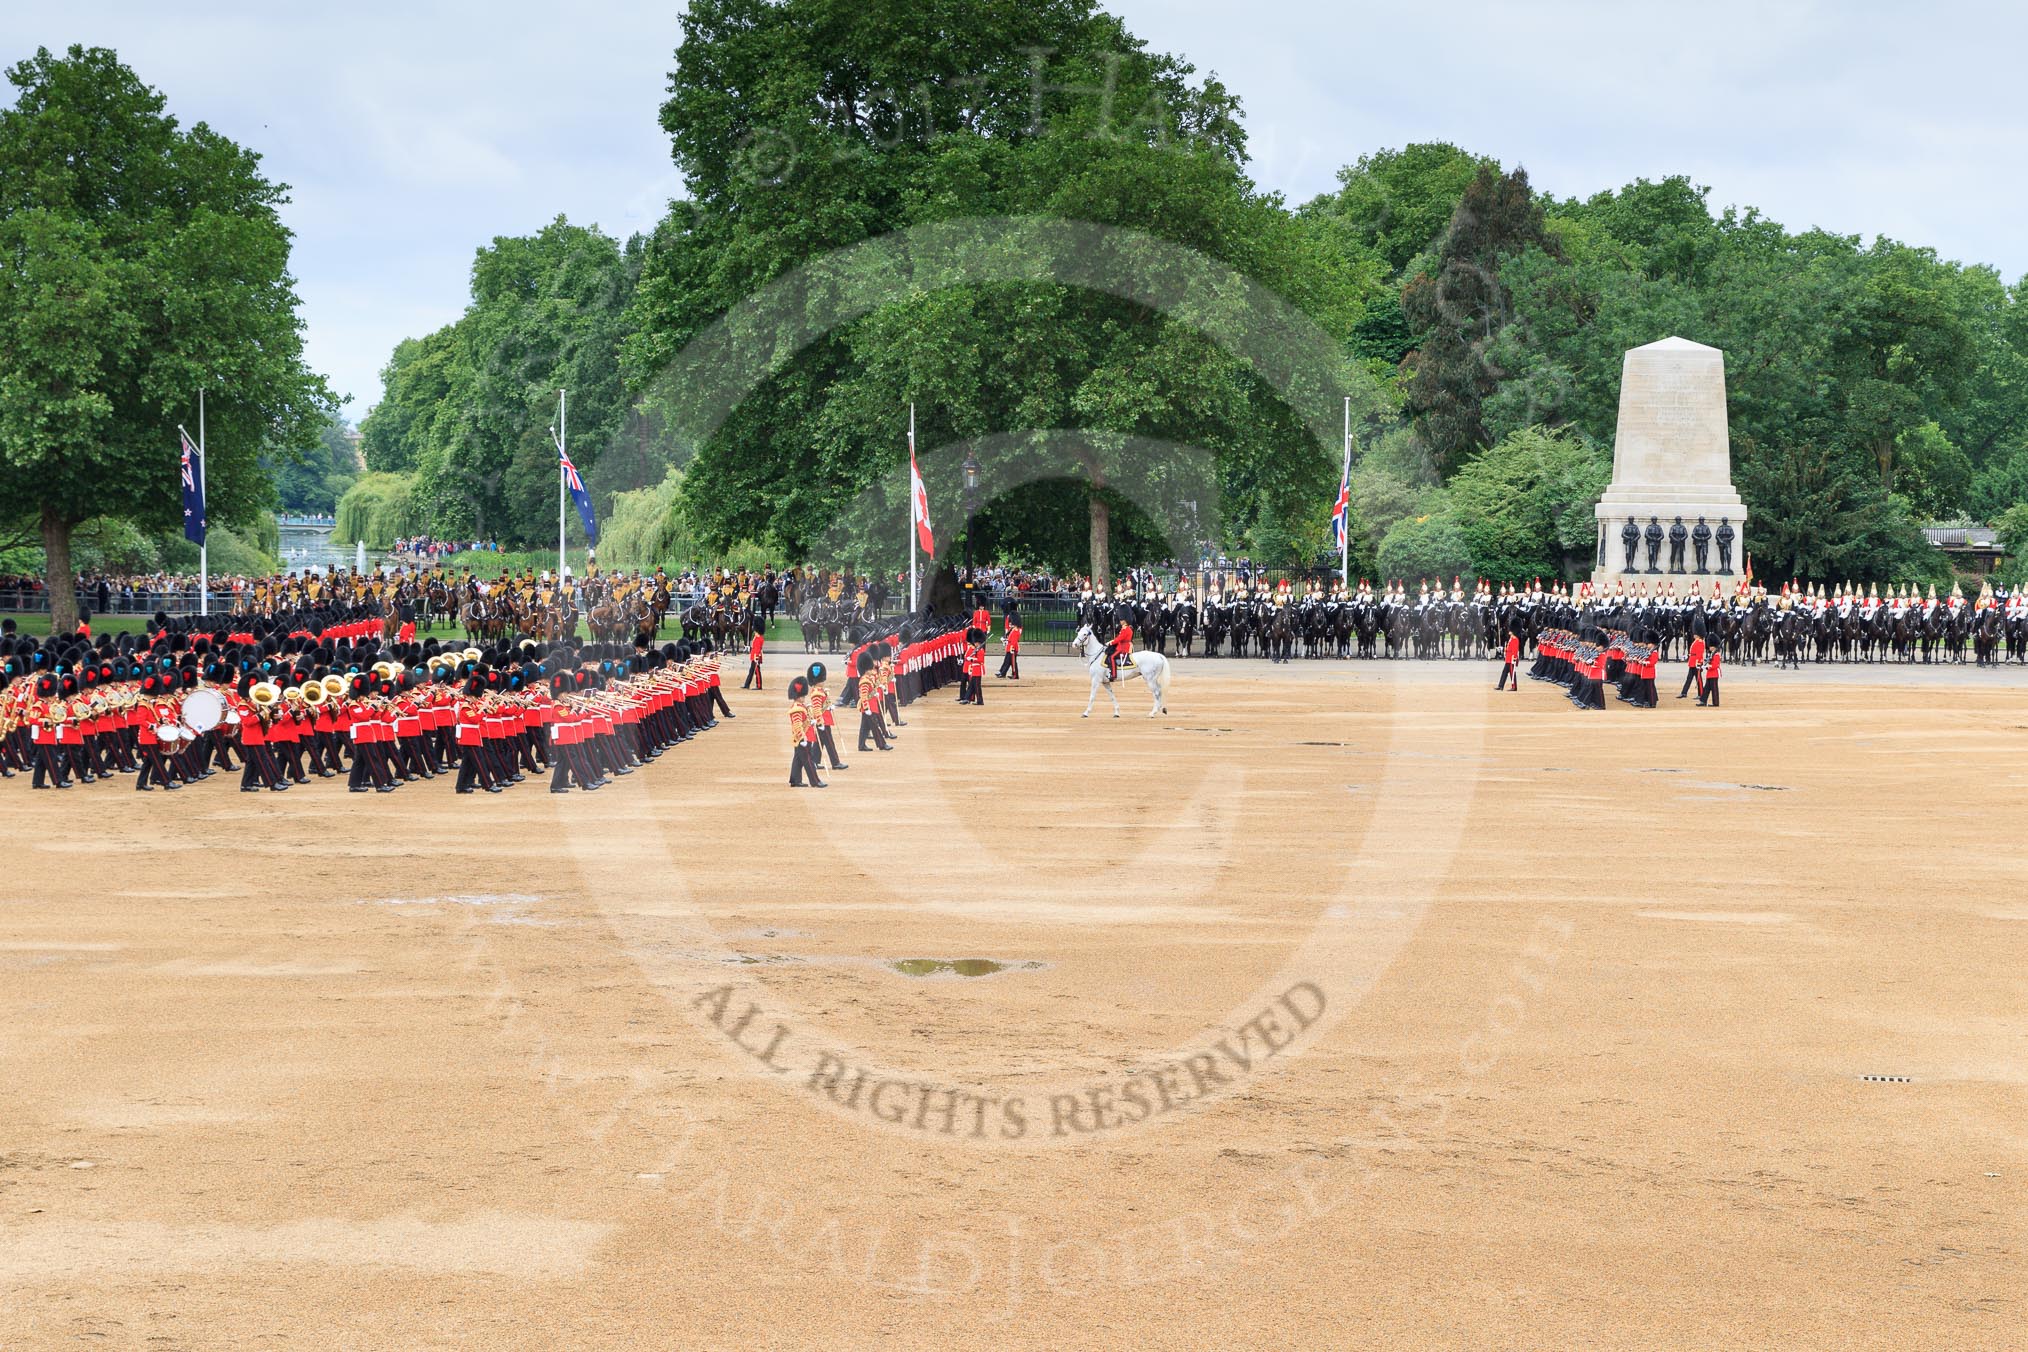 during The Colonel's Review {iptcyear4} (final rehearsal for Trooping the Colour, The Queen's Birthday Parade)  at Horse Guards Parade, Westminster, London, 2 June 2018, 11:32.